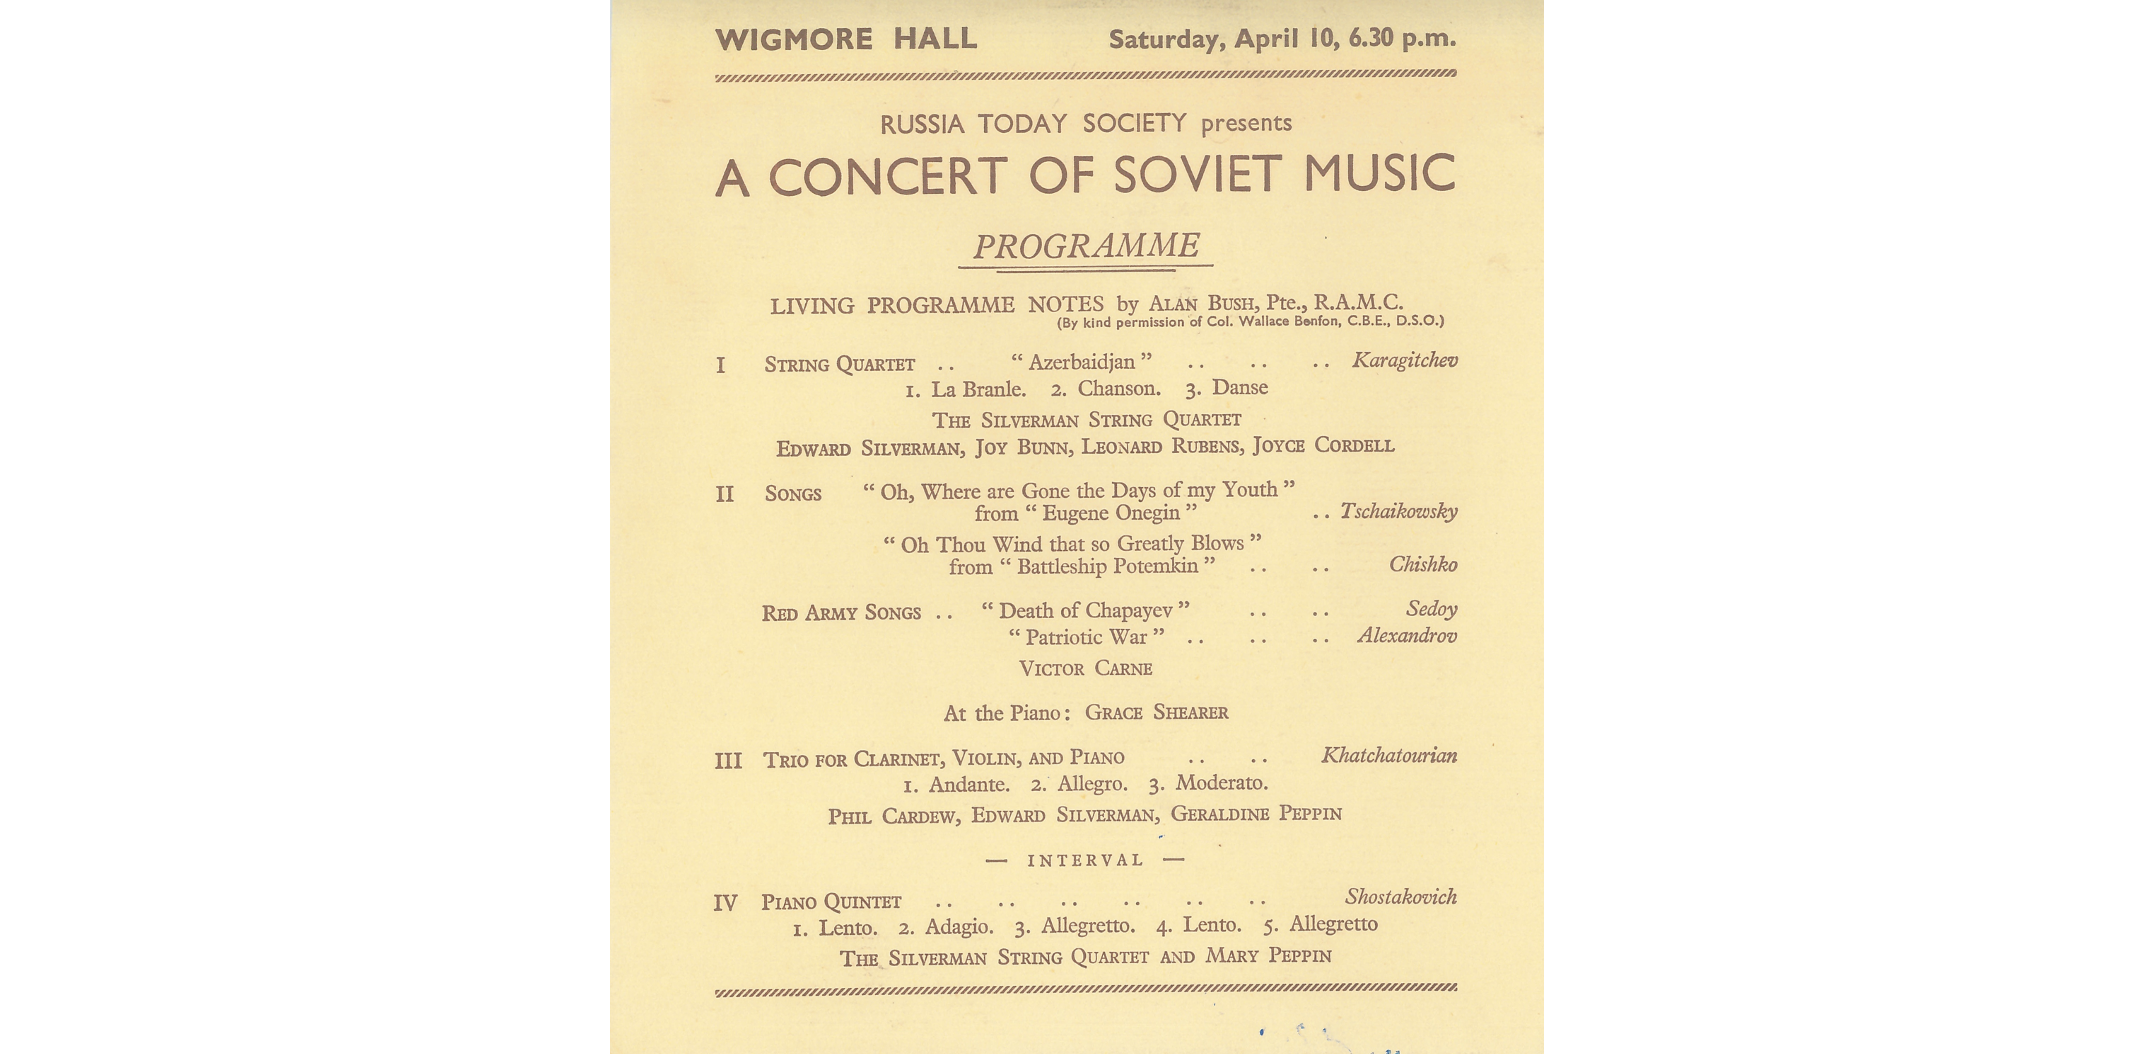 A concert programme of a “A Concert of Soviet Music” presented by Russia Today Society, at the Wigmore Hall, on Saturday, April 10, 6.30 p.m.